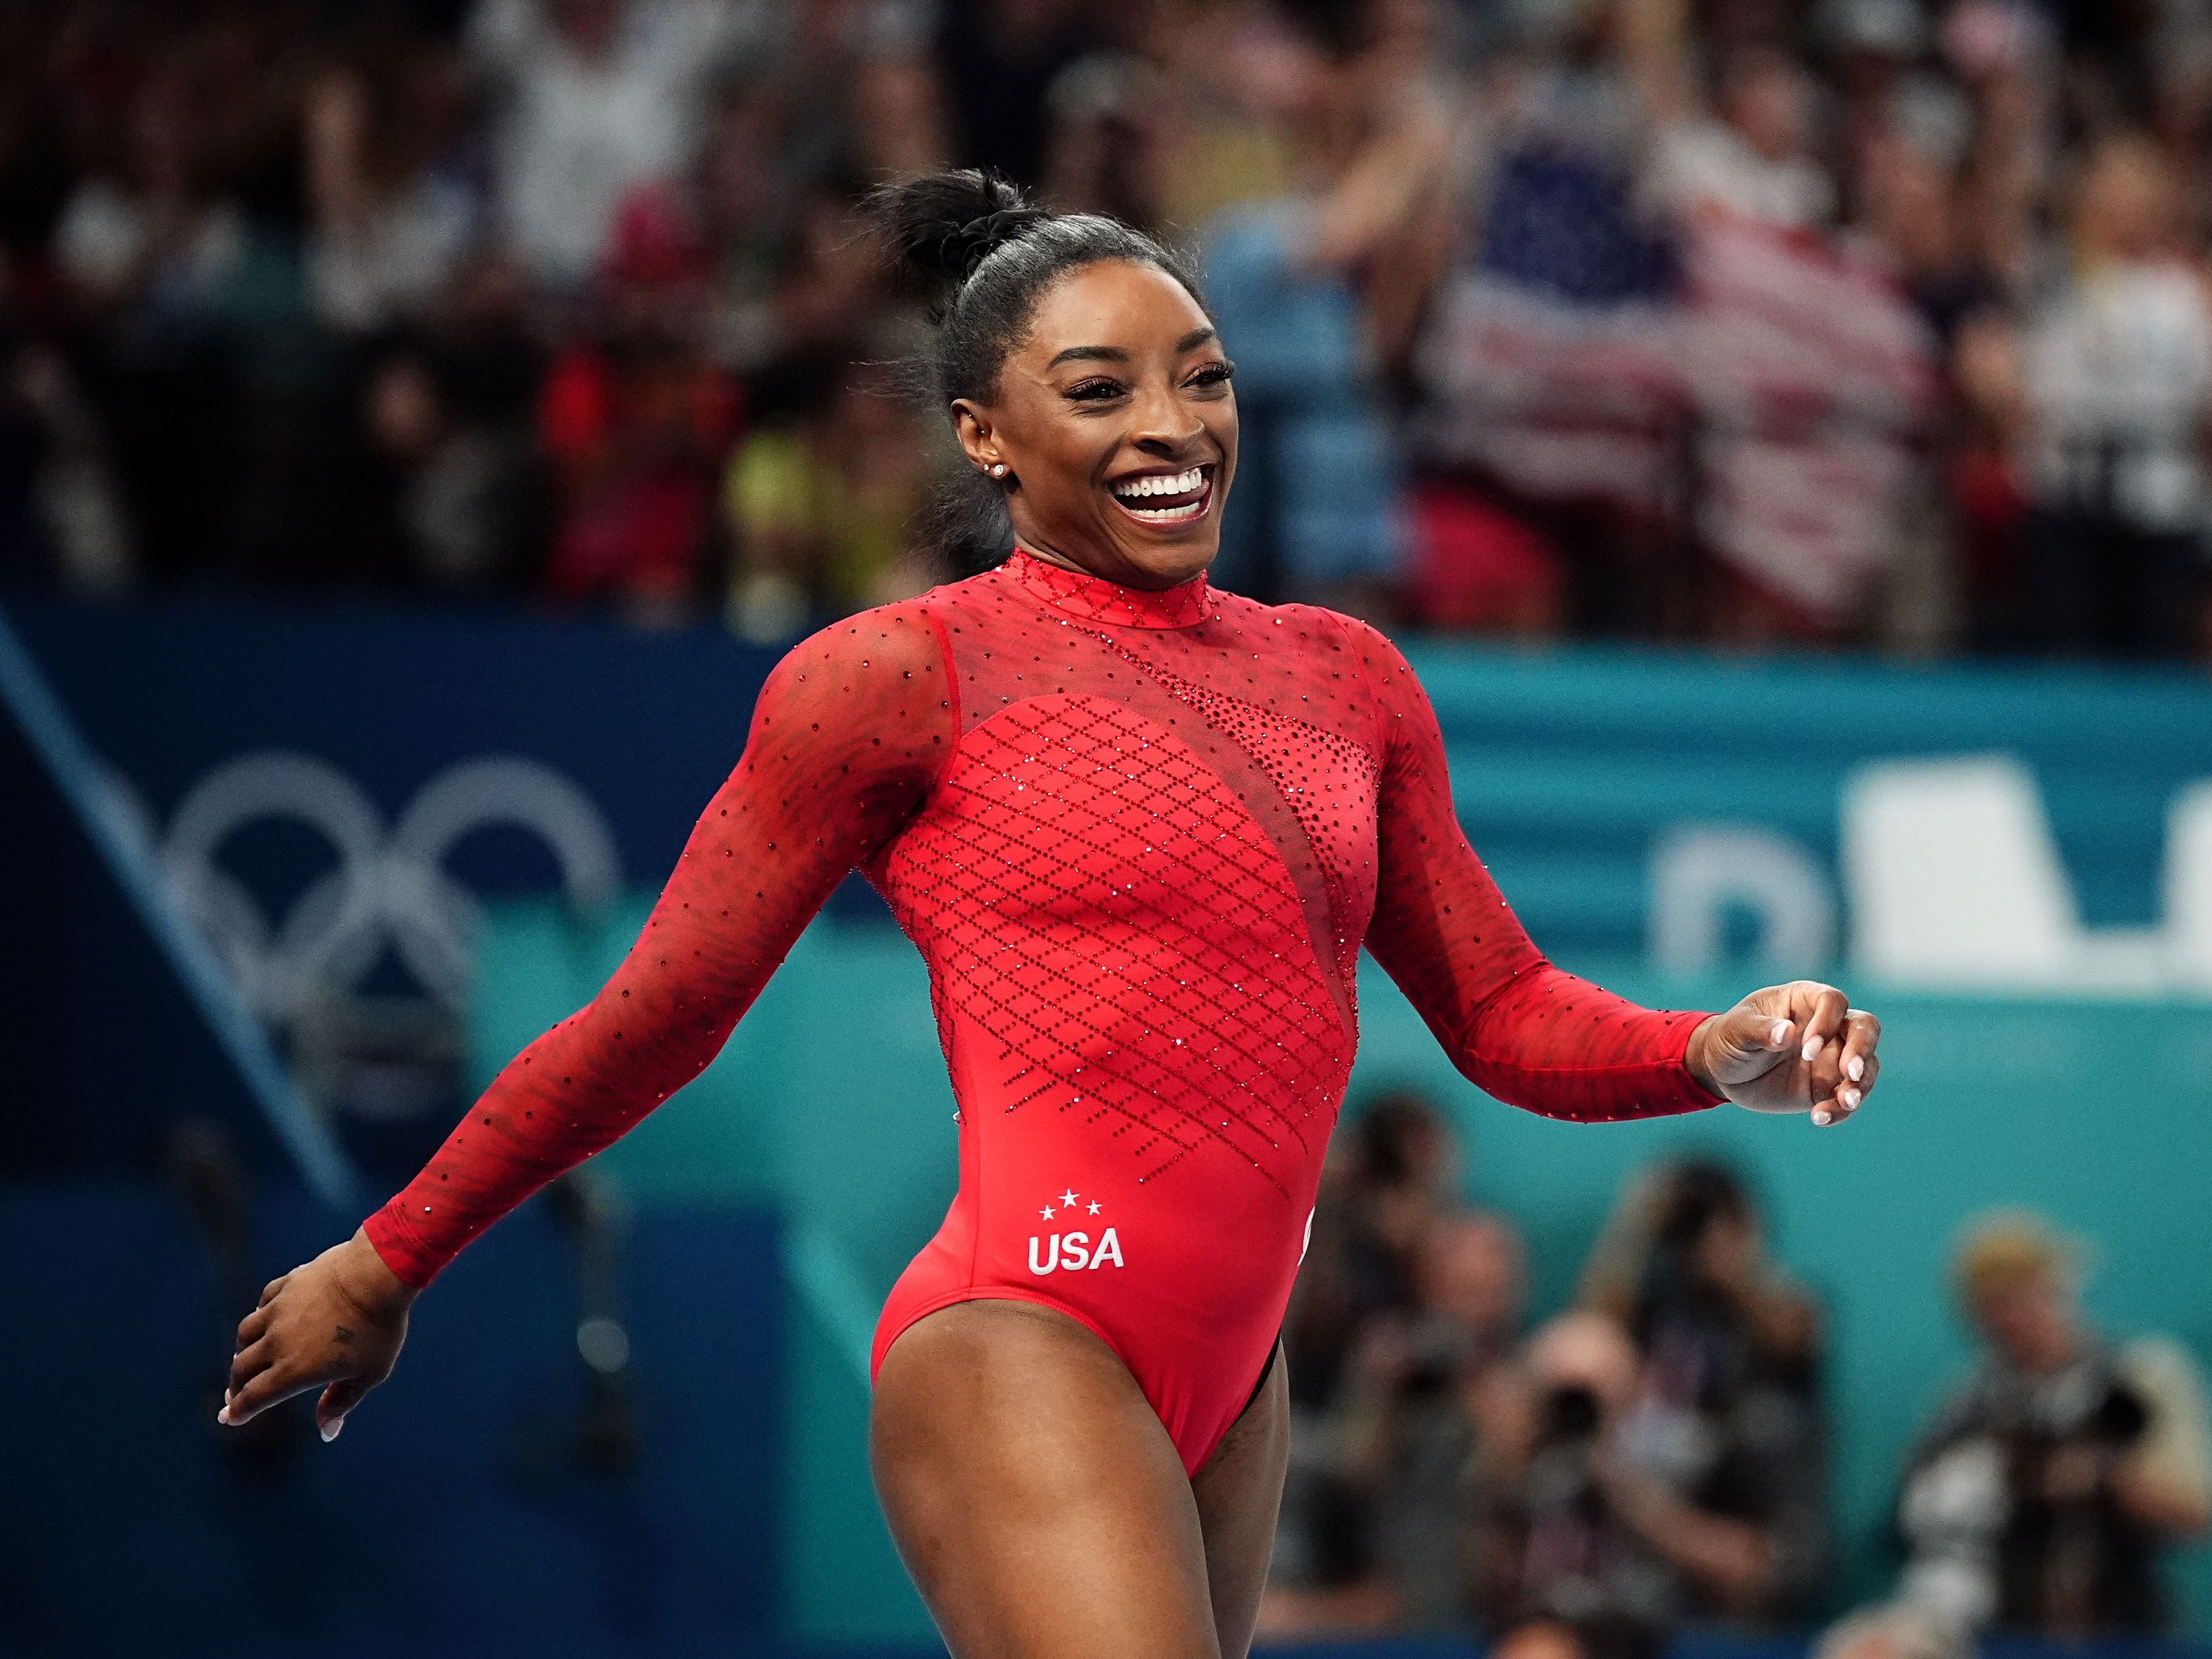 Simone Biles all smiles after seventh Olympic gold medal and third in Paris